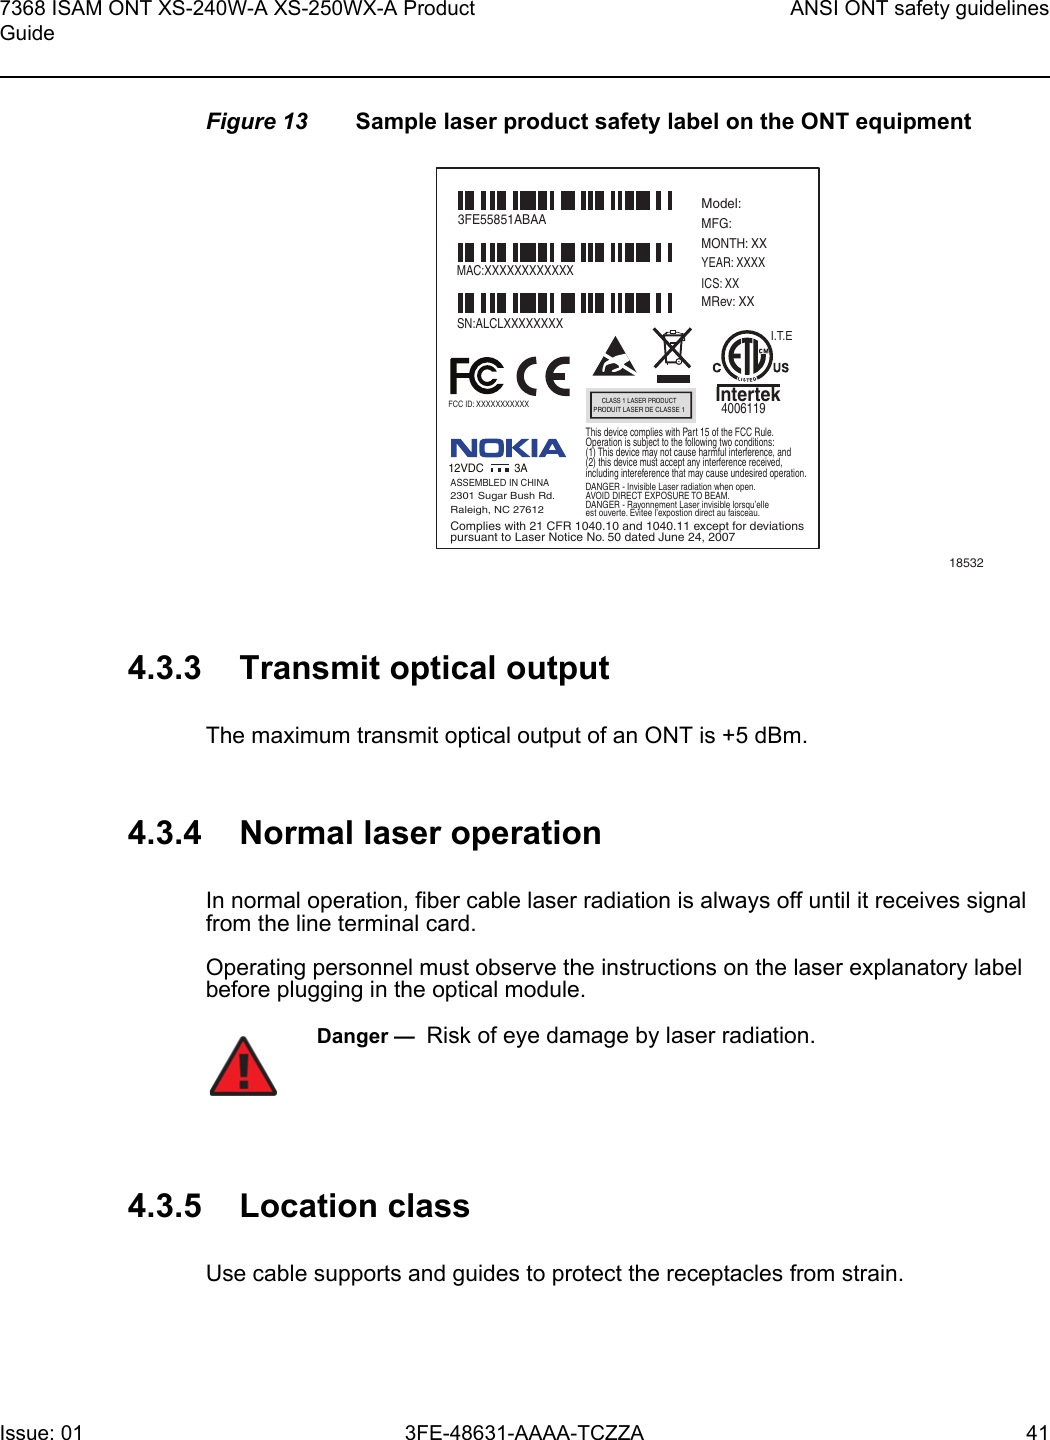 7368 ISAM ONT XS-240W-A XS-250WX-A Product GuideANSI ONT safety guidelinesIssue: 01 3FE-48631-AAAA-TCZZA 41 Figure 13 Sample laser product safety label on the ONT equipment4.3.3 Transmit optical outputThe maximum transmit optical output of an ONT is +5 dBm.4.3.4 Normal laser operationIn normal operation, fiber cable laser radiation is always off until it receives signal from the line terminal card.Operating personnel must observe the instructions on the laser explanatory label before plugging in the optical module.4.3.5 Location classUse cable supports and guides to protect the receptacles from strain.185323FE55851ABAAModel:MFG:MONTH: XXYEAR: XXXXICS: XXMRev: XX MAC:XXXXXXXXXXXXSN:ALCLXXXXXXXXFCC ID: XXXXXXXXXXXThis device complies with Part 15 of the FCC Rule.Operation is subject to the following two conditions:(1) This device may not cause harmful interference, and(2) this device must accept any interference received,including intereference that may cause undesired operation. ASSEMBLED IN CHINA2301 Sugar Bush Rd.Raleigh, NC 27612DANGER - Invisible Laser radiation when open.AVOID DIRECT EXPOSURE TO BEAM.DANGER - Rayonnement Laser invisible lorsqu’elleest ouverte. Evitee l’expostion direct au faisceau.Complies with 21 CFR 1040.10 and 1040.11 except for deviationspursuant to Laser Notice No. 50 dated June 24, 200712VDC 3AI.T.EIntertek4006119CLASS 1 LASER PRODUCTPRODUIT LASER DE CLASSE 1Danger —  Risk of eye damage by laser radiation.